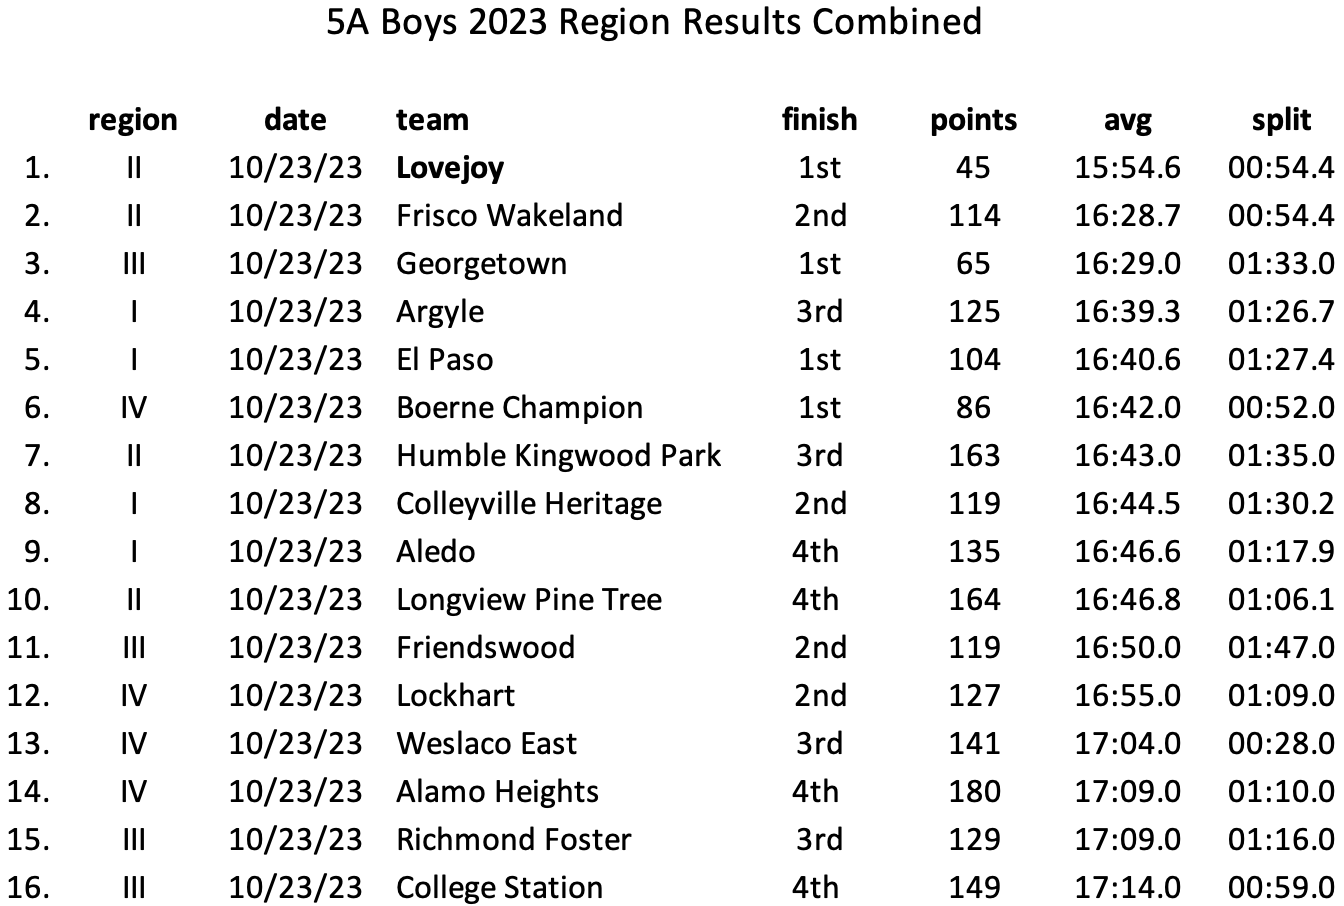 the 5A boys Region results sorted by average times